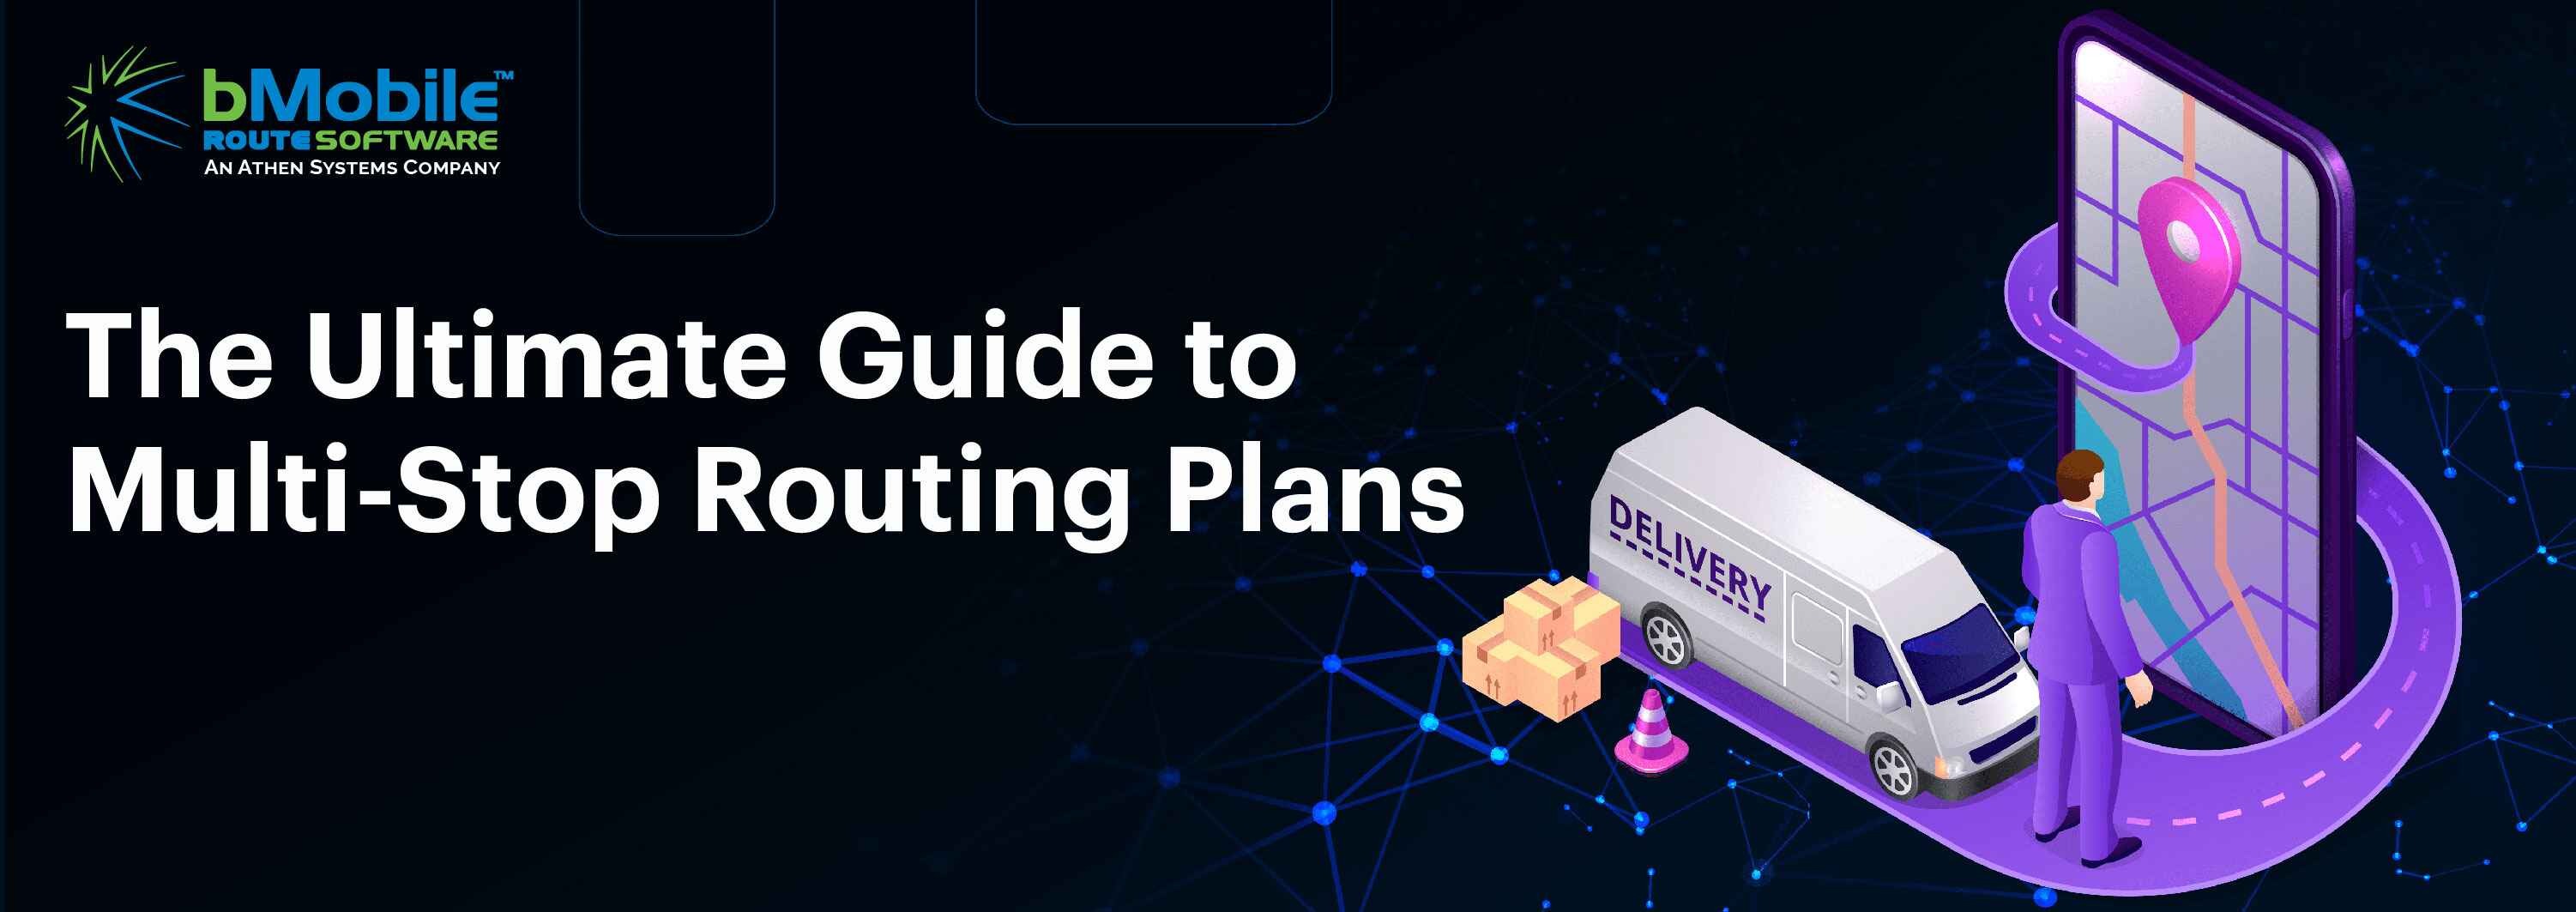 The Ultimate Guide to Multi-Stop Routing Plans